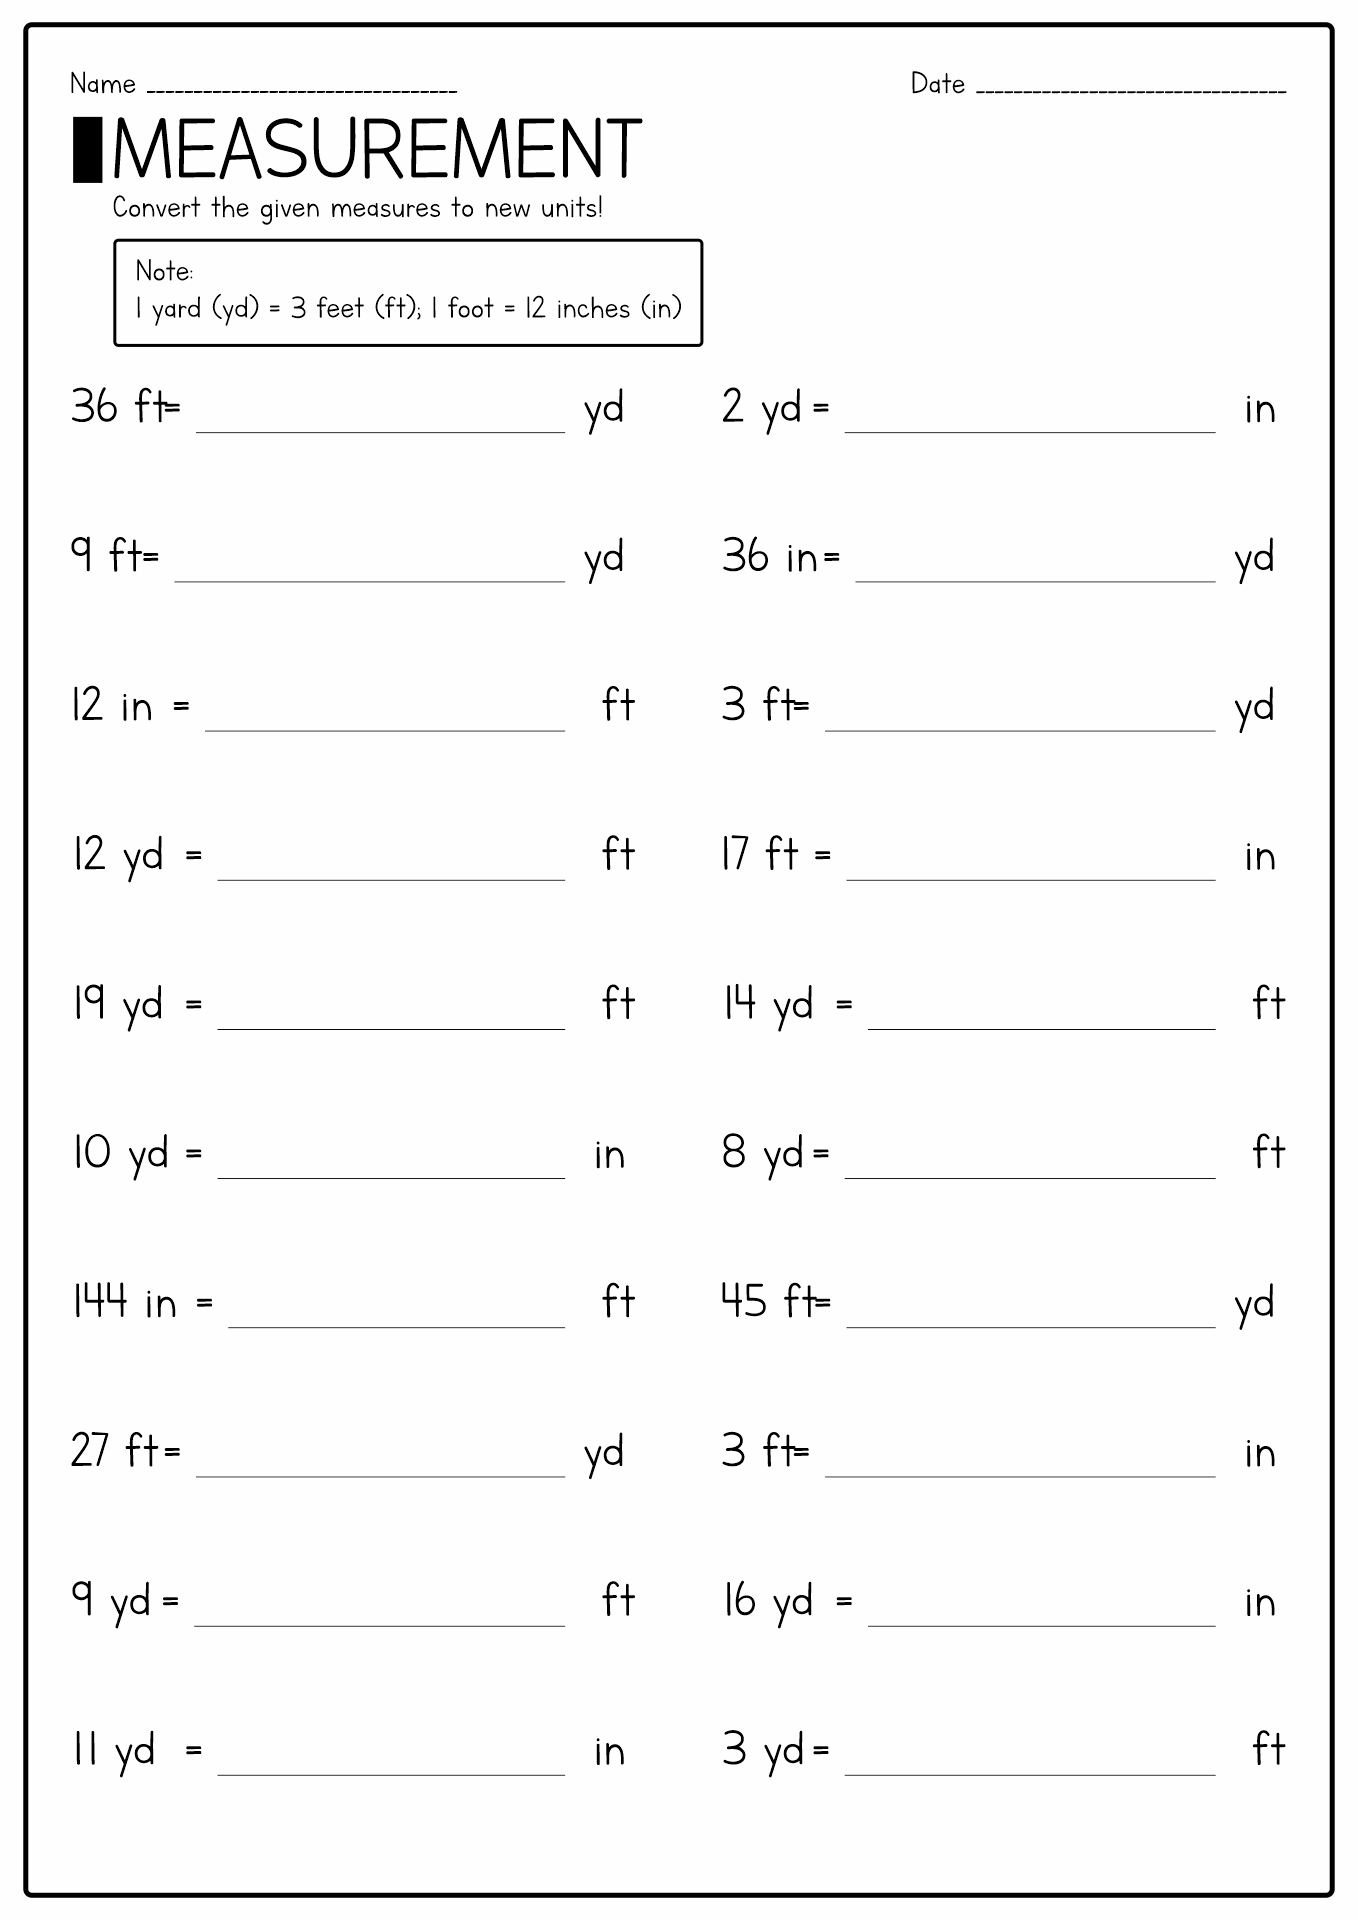 Yards Feet and Inches Worksheets Image